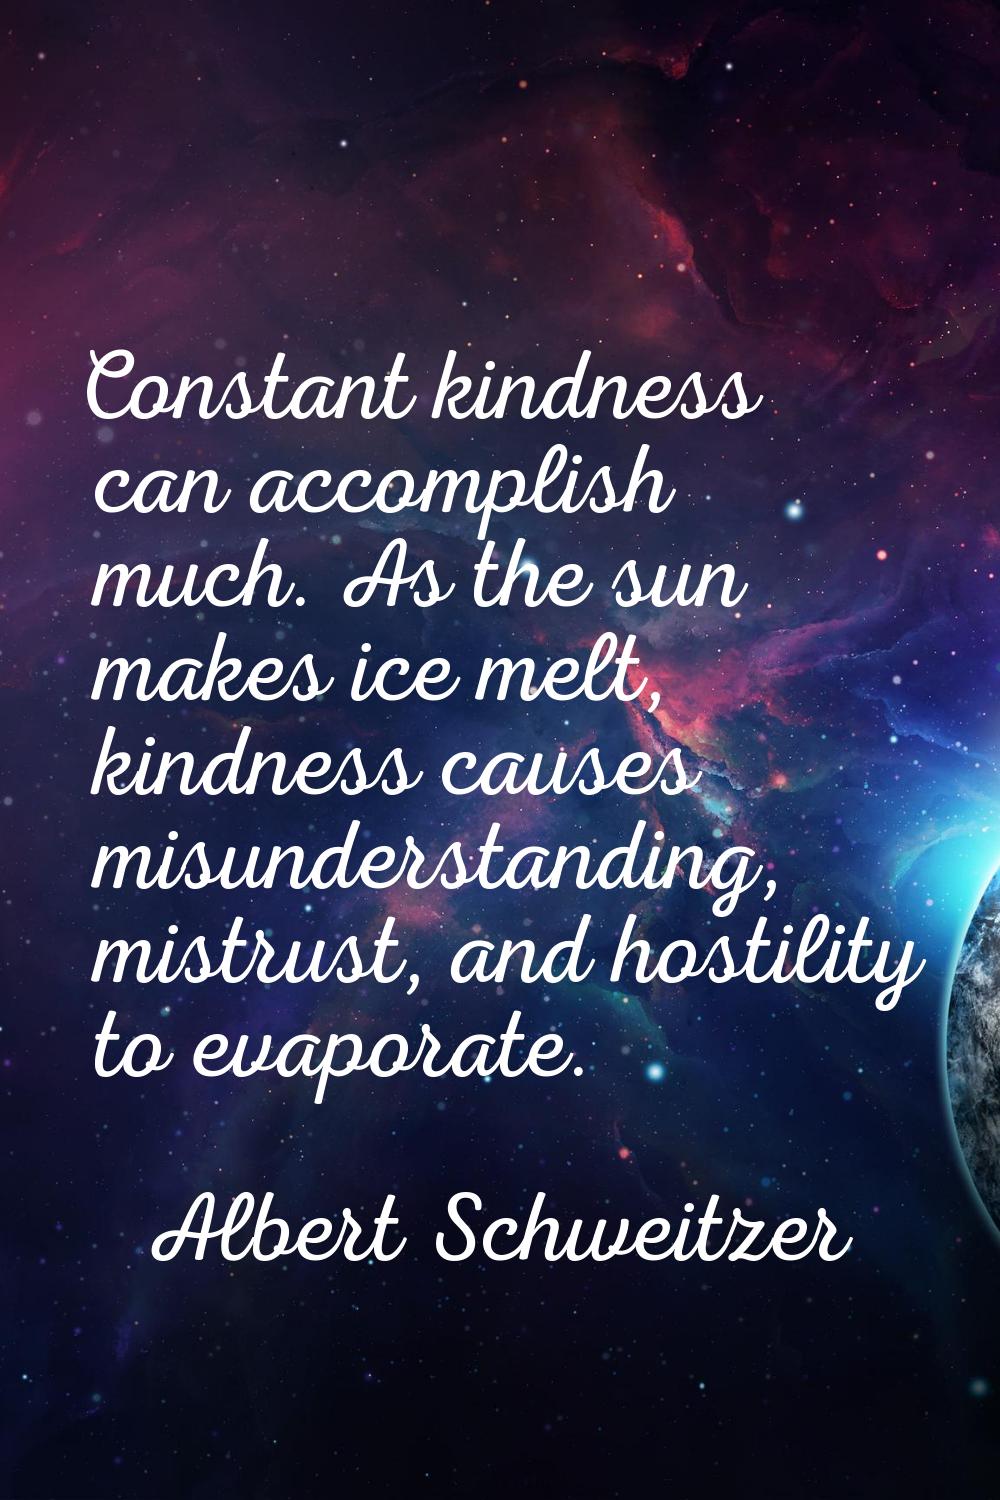 Constant kindness can accomplish much. As the sun makes ice melt, kindness causes misunderstanding,